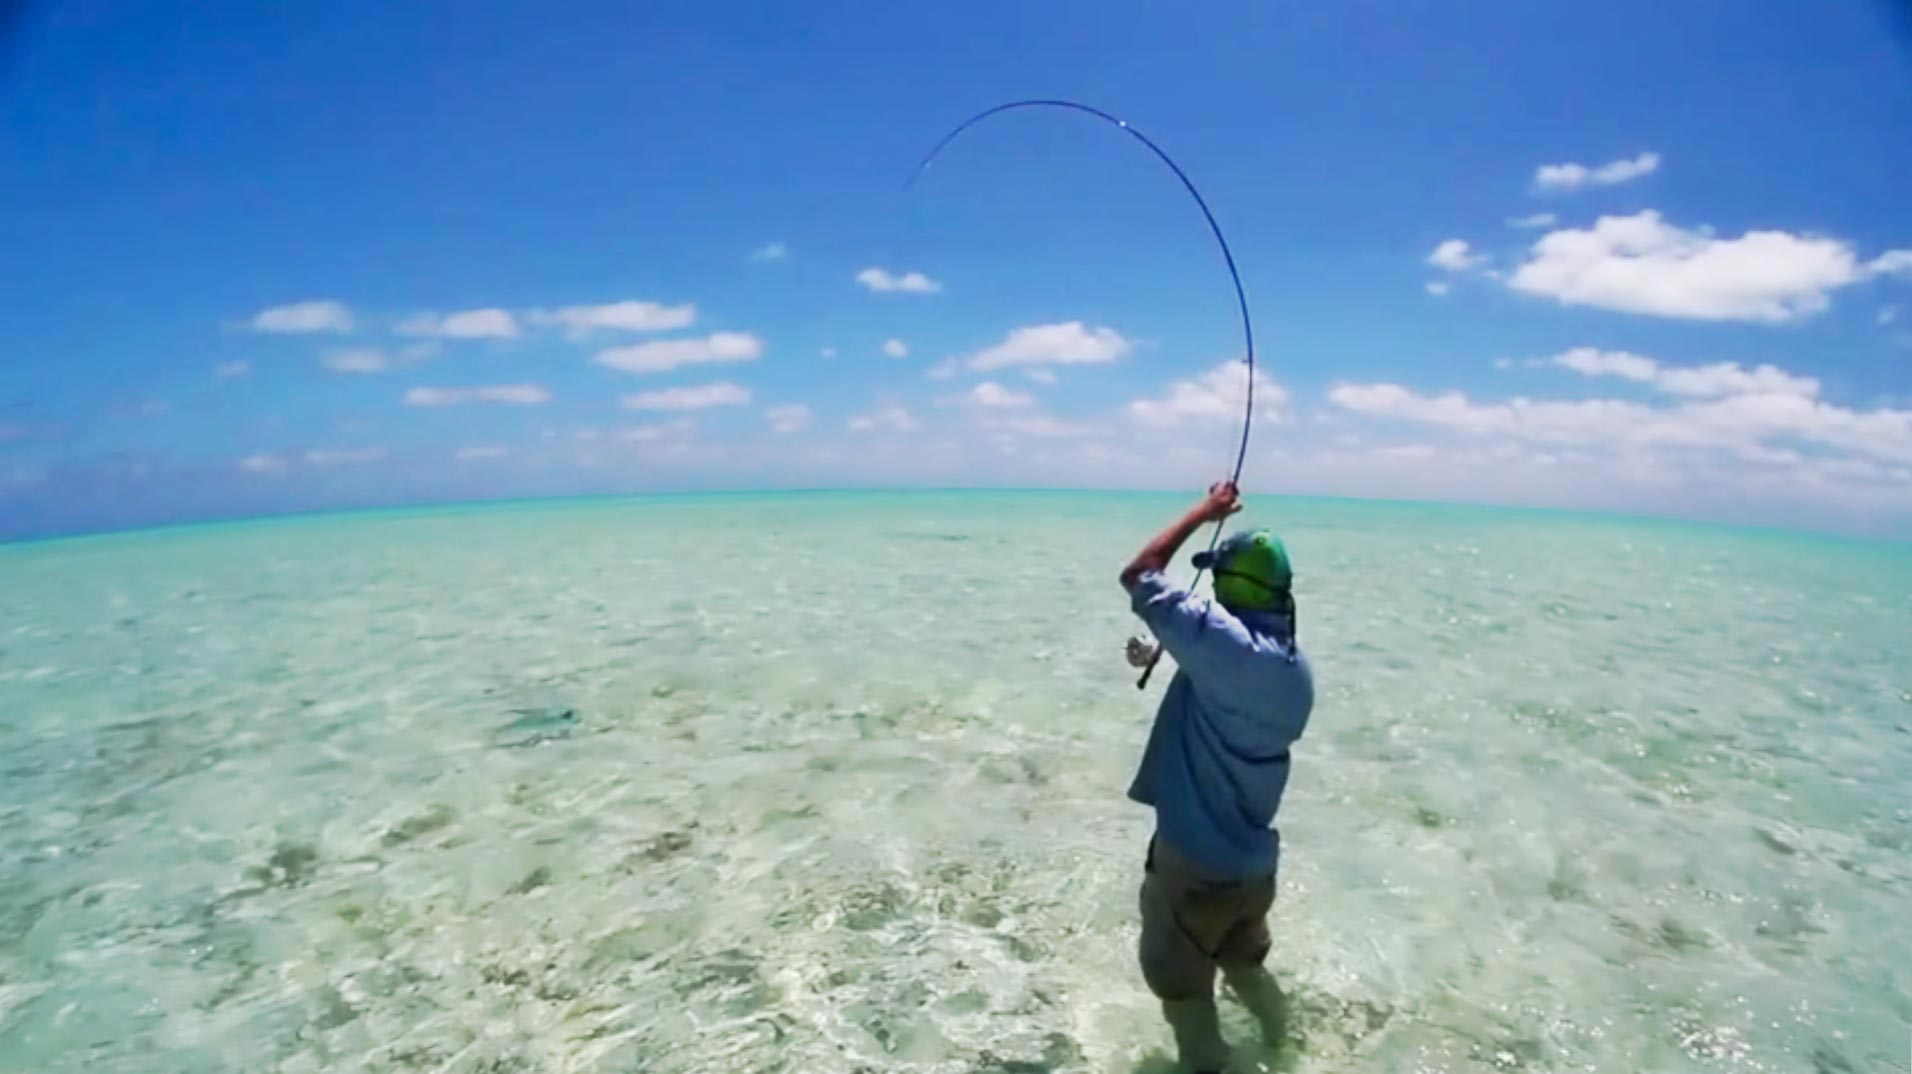 From the video "Cuba Saltwater Permit Fishing"